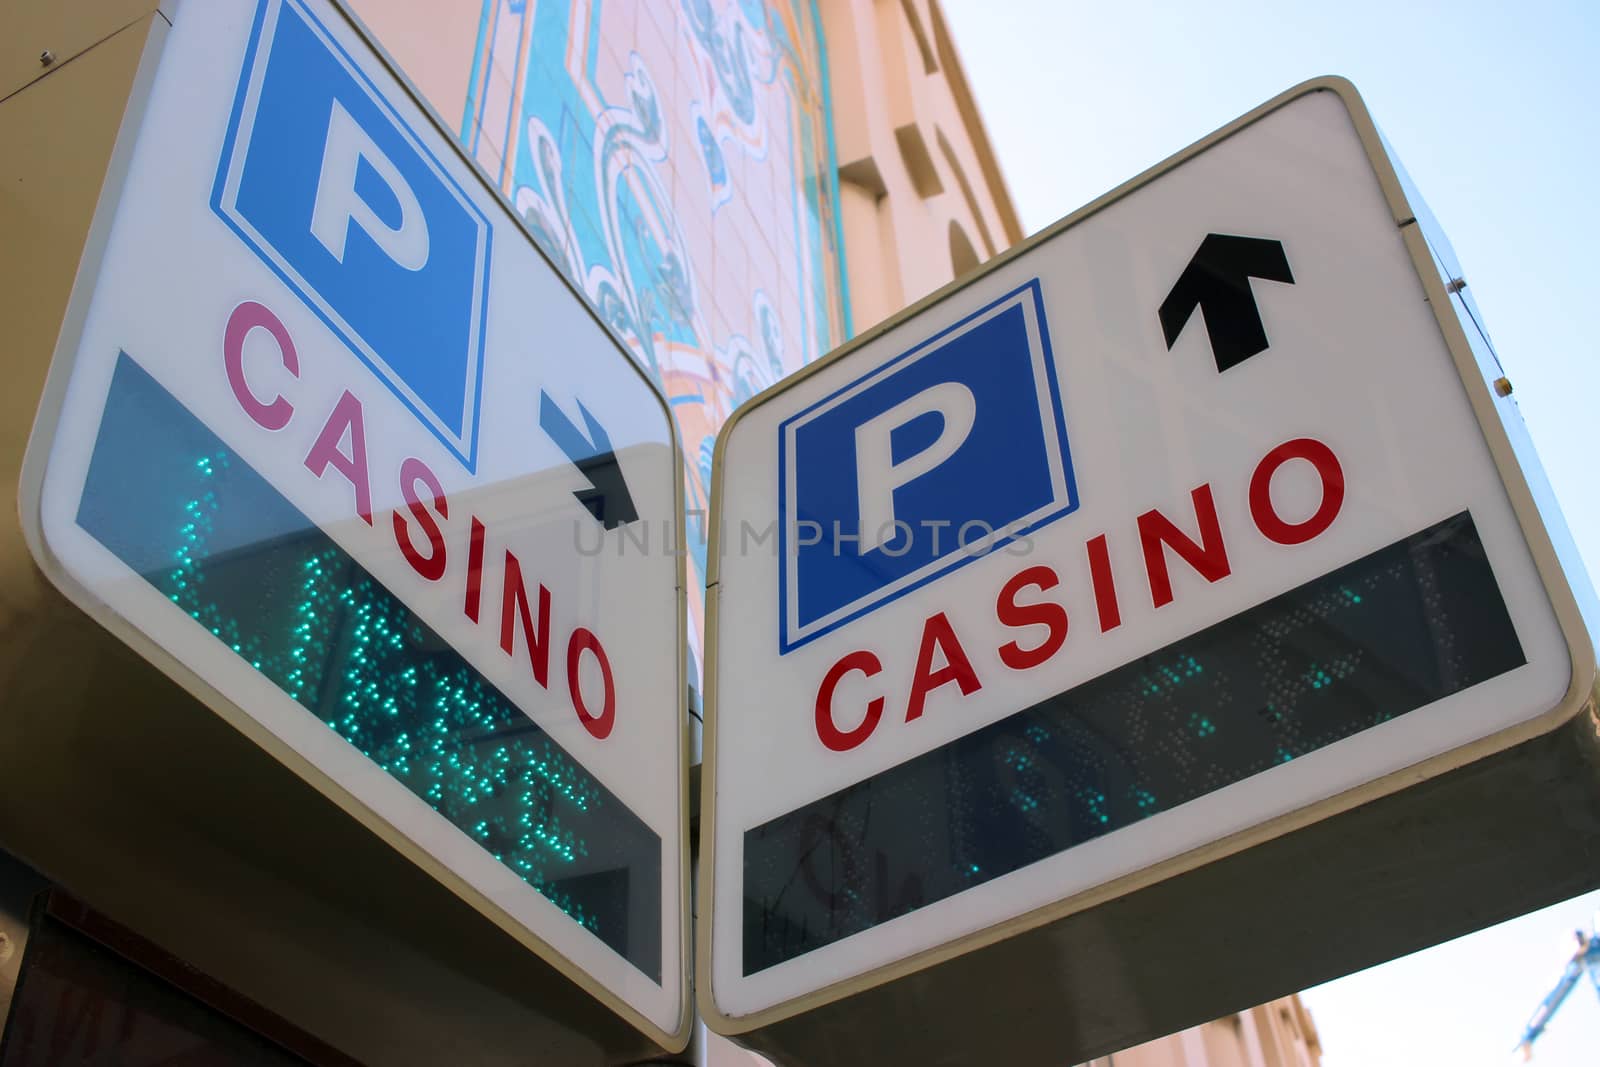 Casino and Parkings Signs in Monaco by bensib